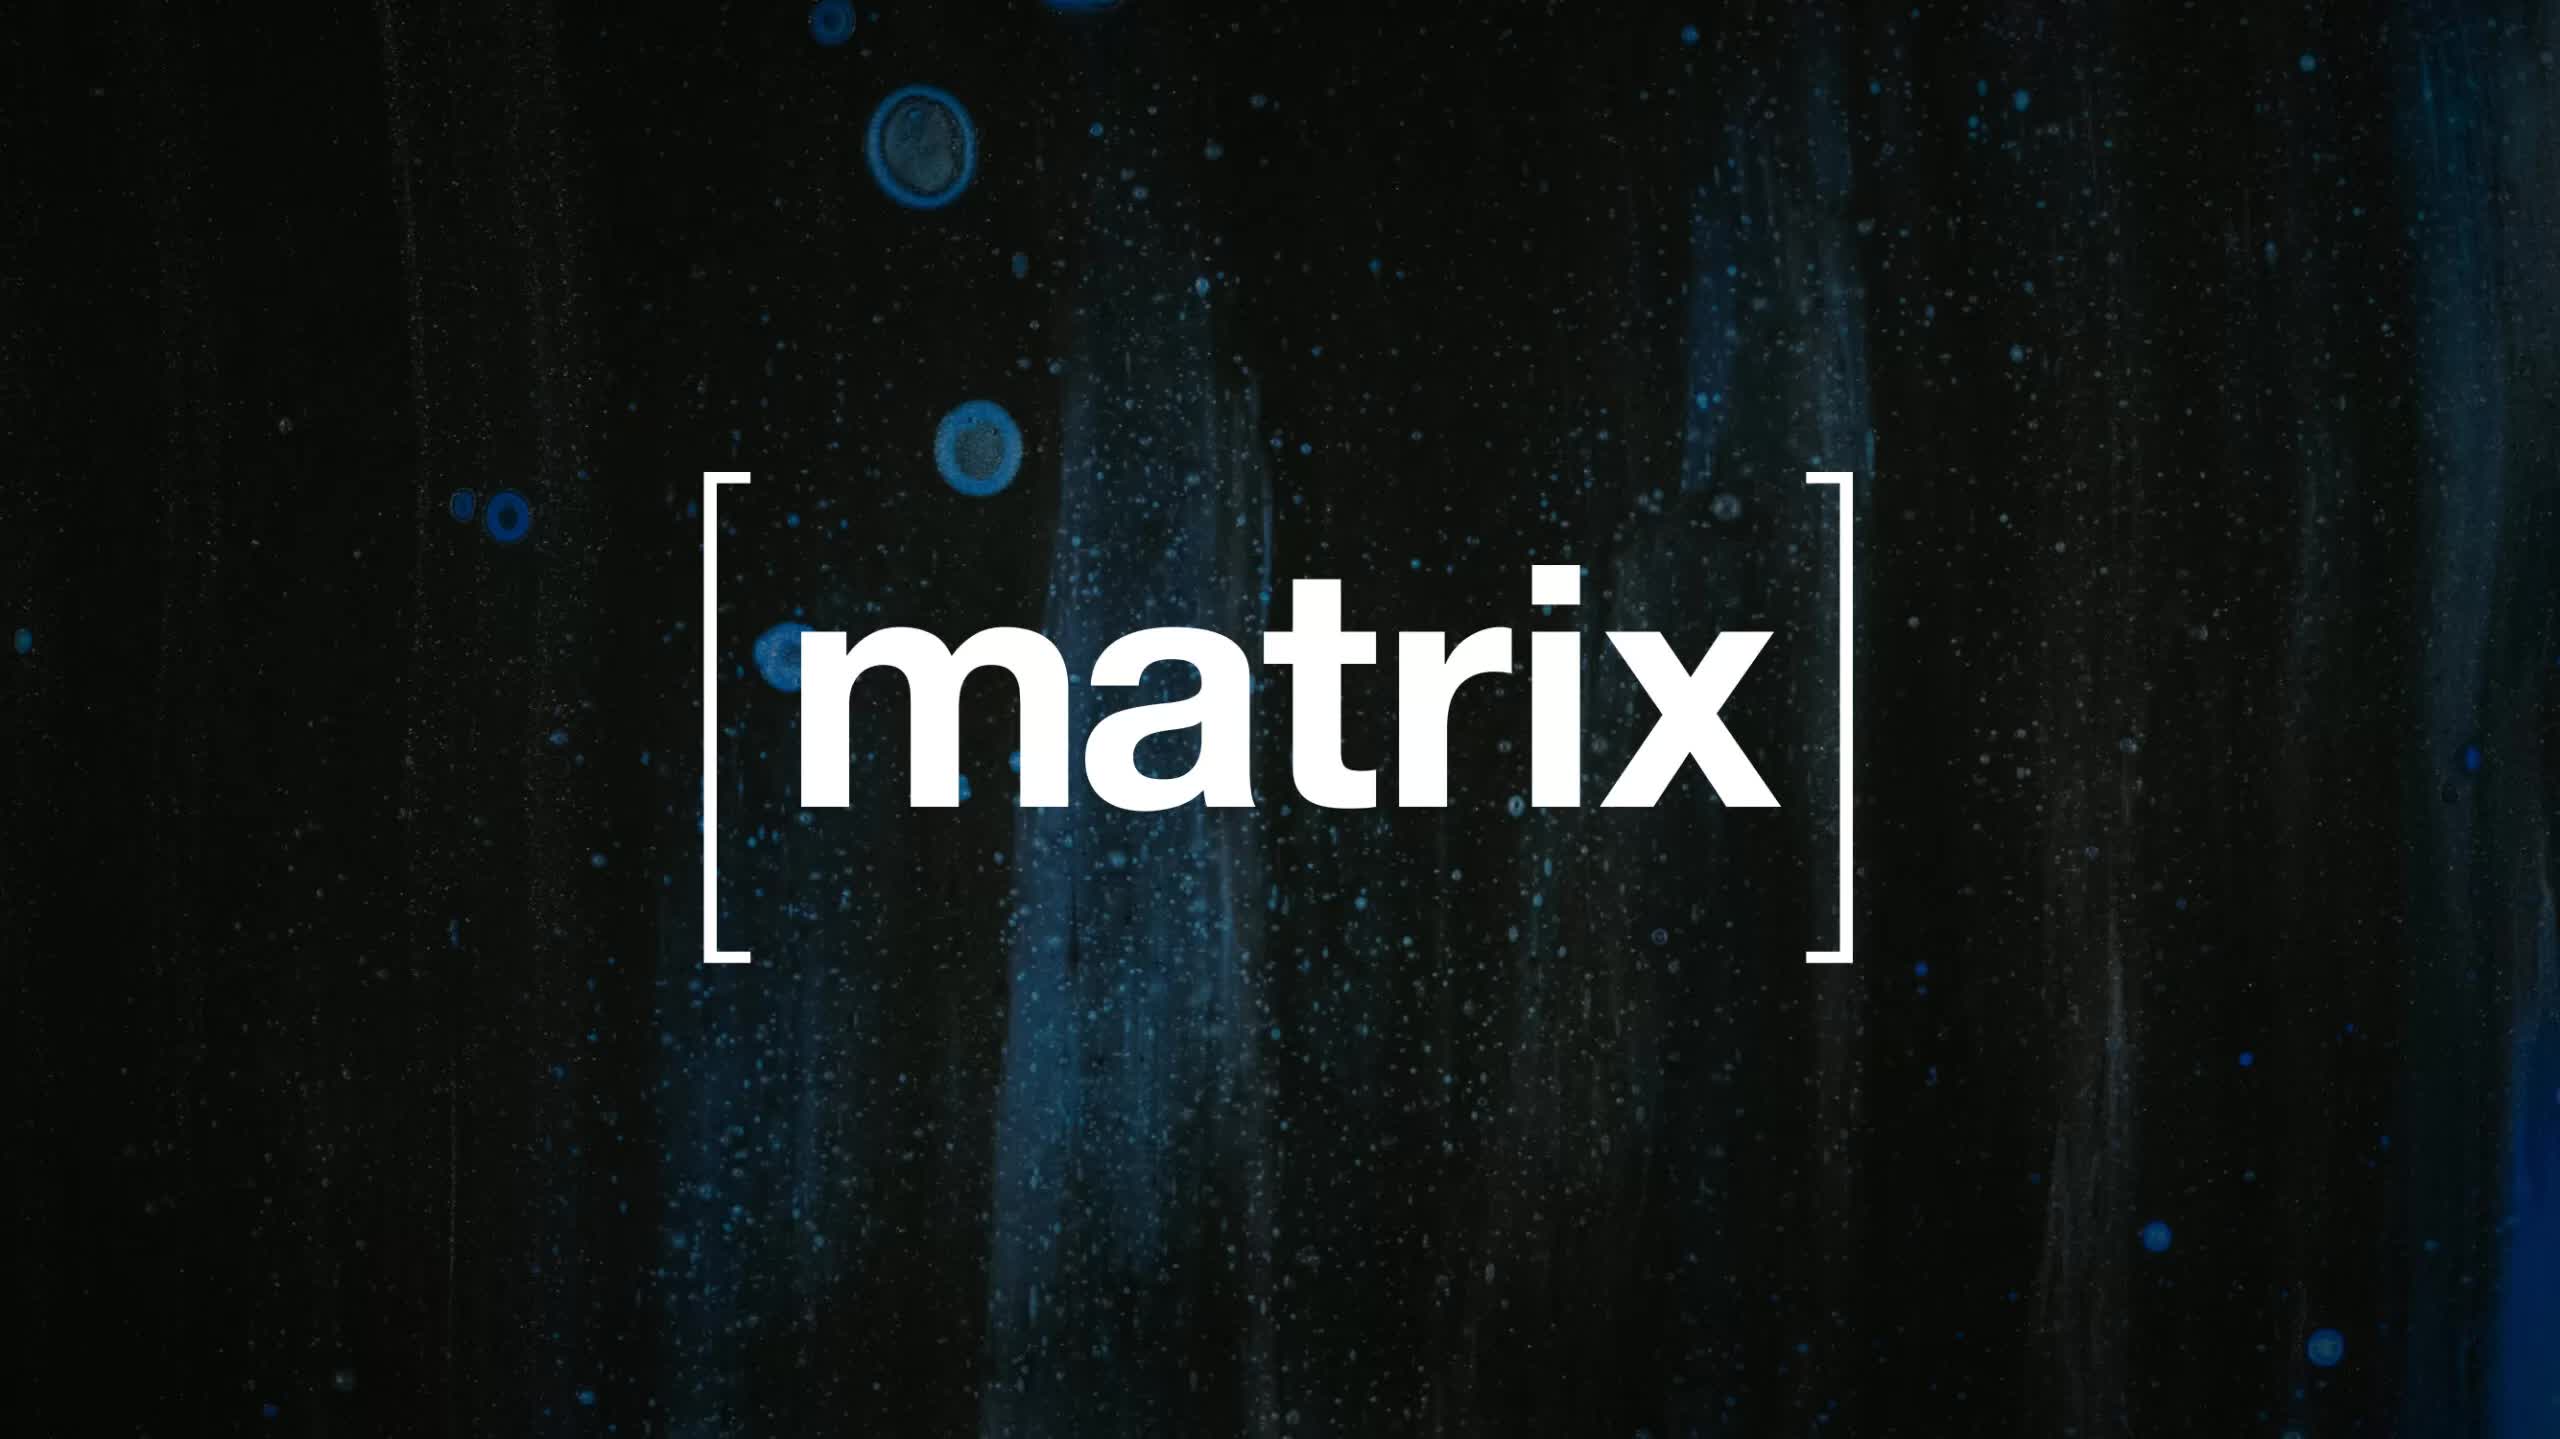 The Matrix messaging protocol now has over 115 million users